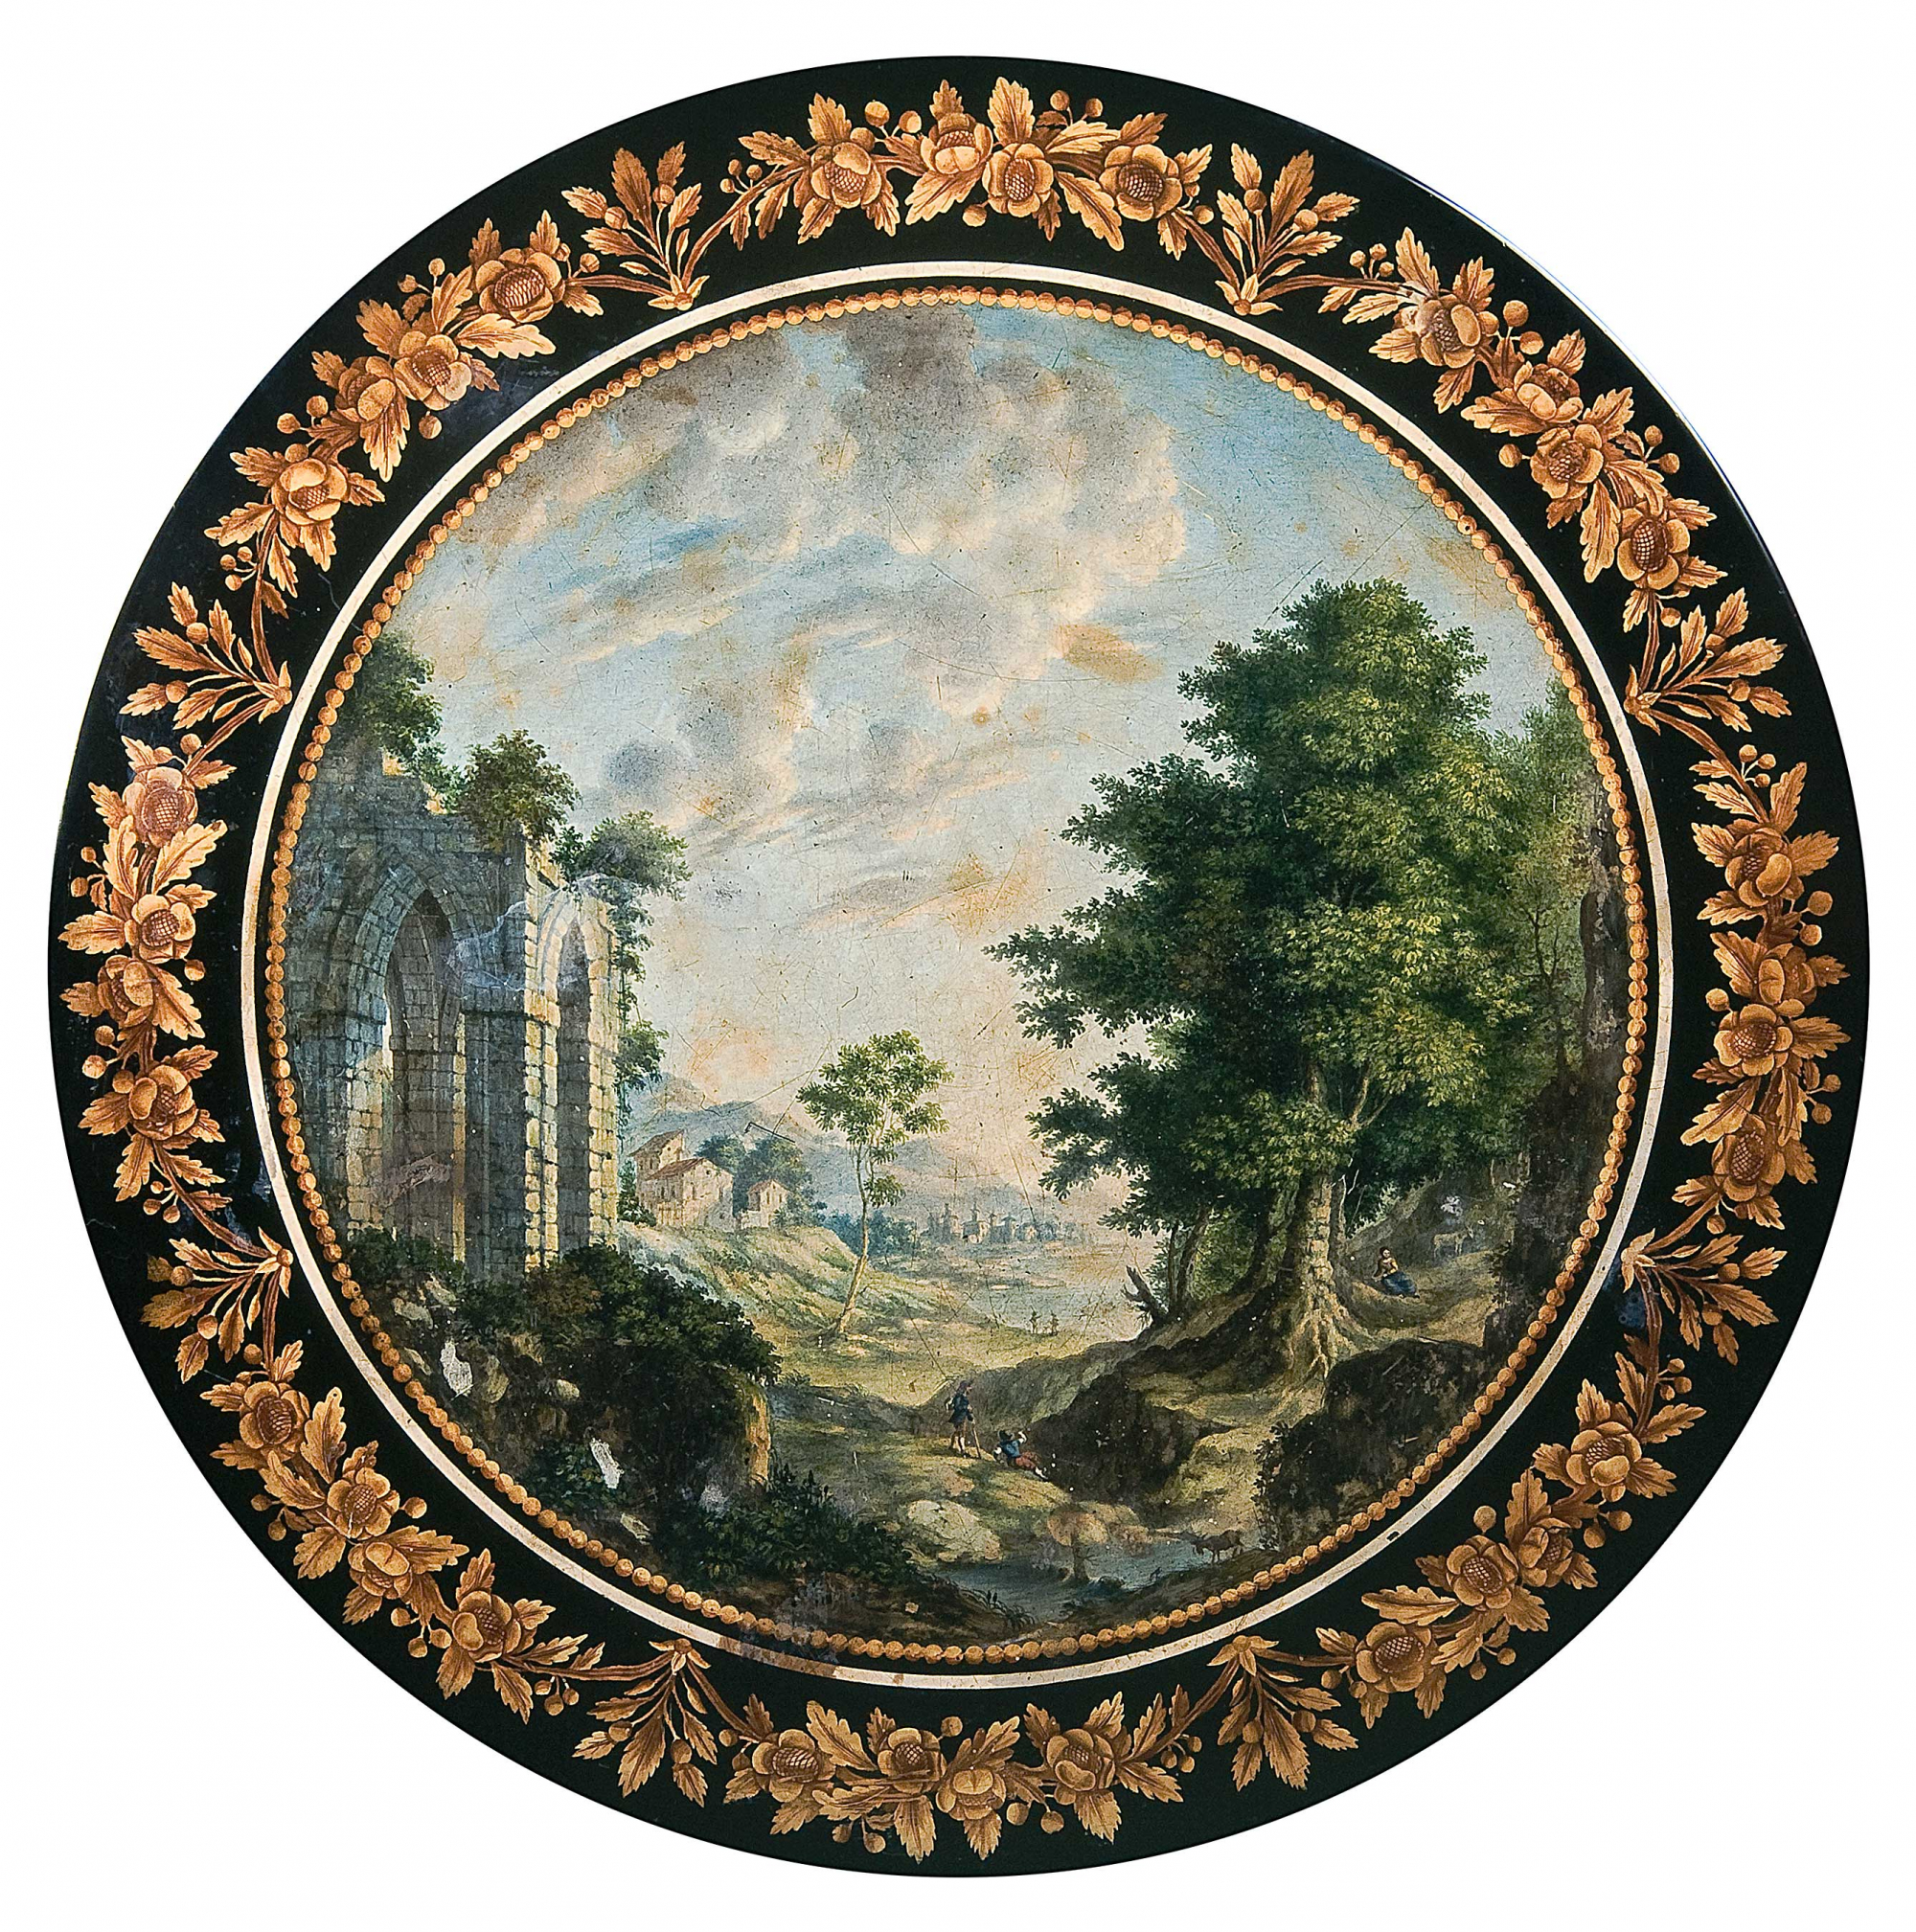 Florence, about 1820 - Table with a scagliola top